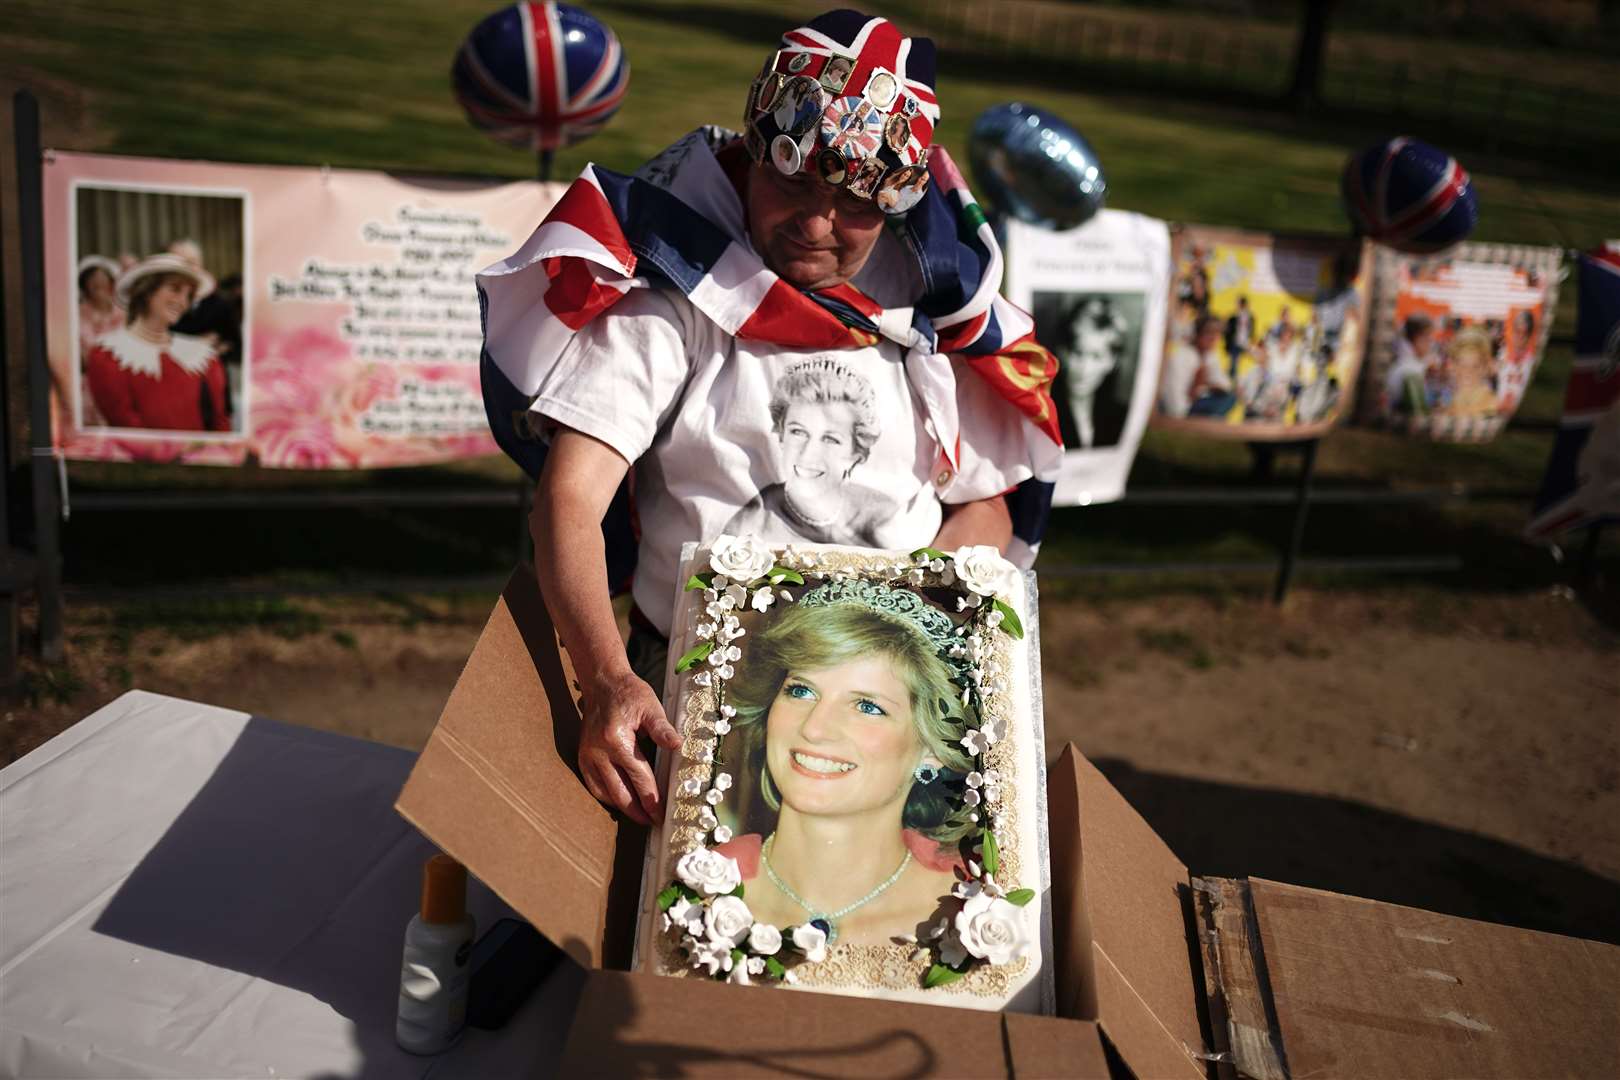 Royal fan John Loughrey opens a box containing a large cake with an image of Diana, Princess of Wales, outside her former home Kensington Palace (Aaron Chown/PA)